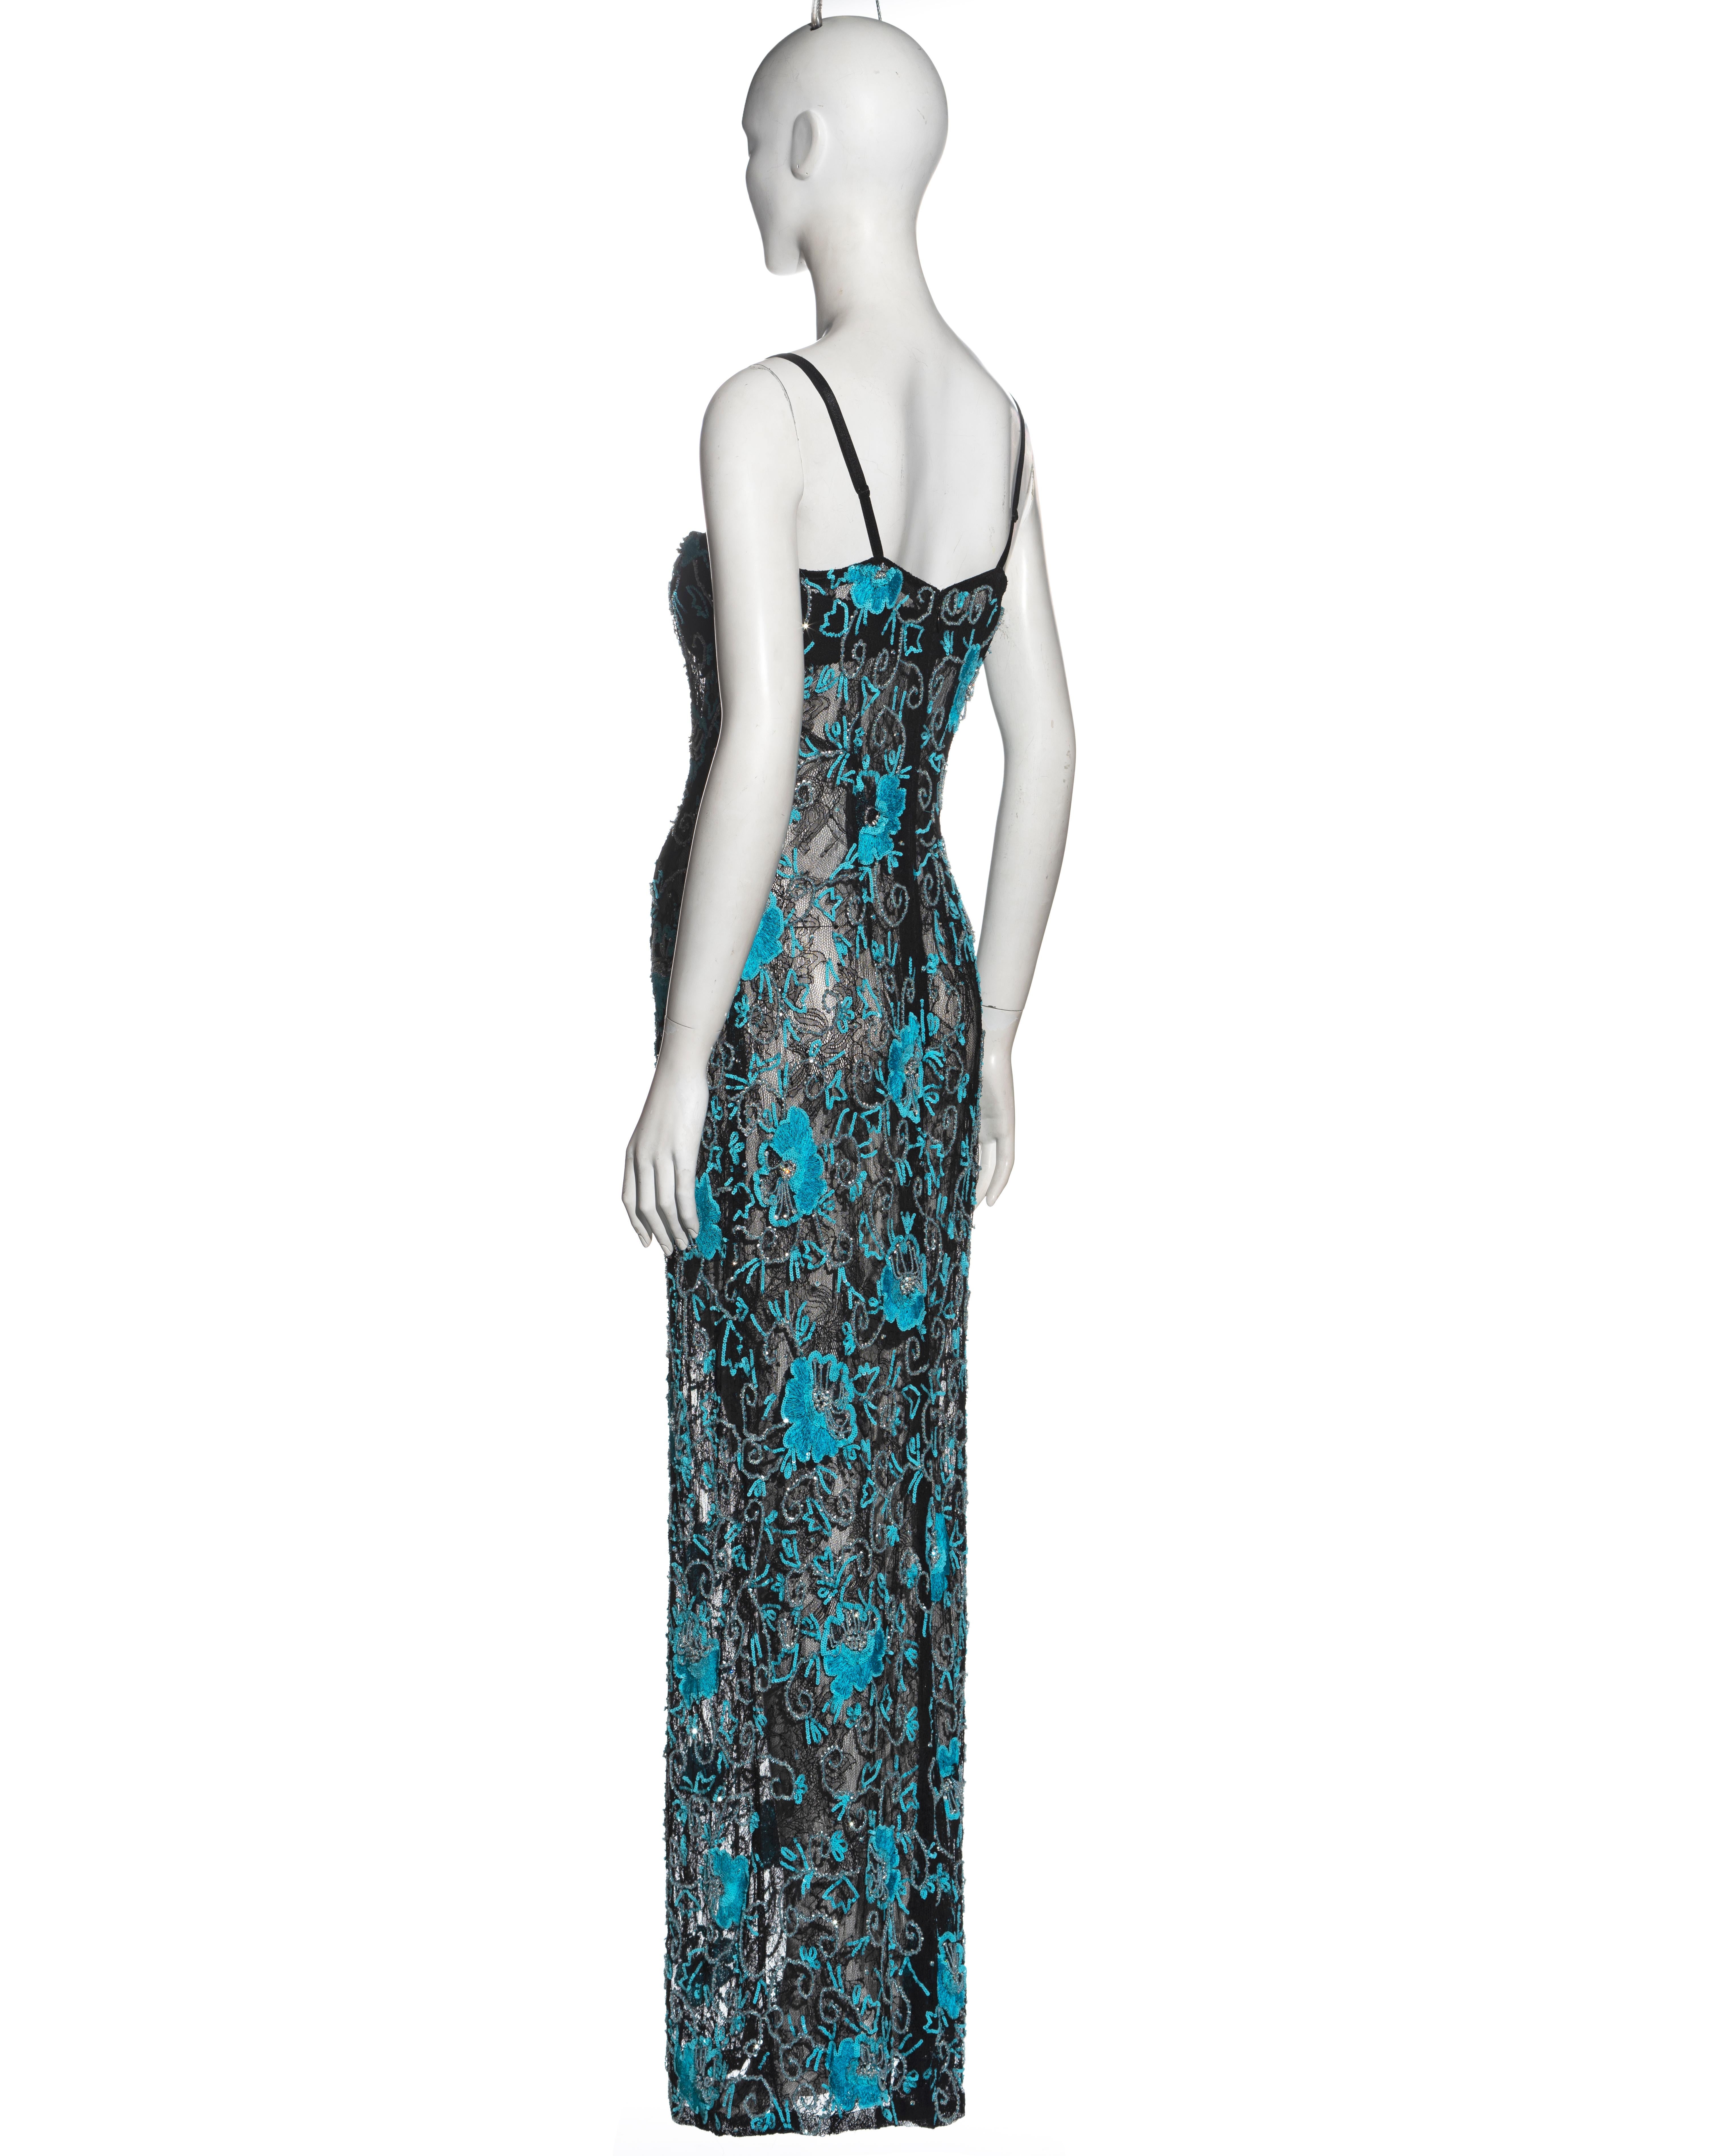 Dolce & Gabbana black lace evening dress with turquoise embroidery, fw 1999 1